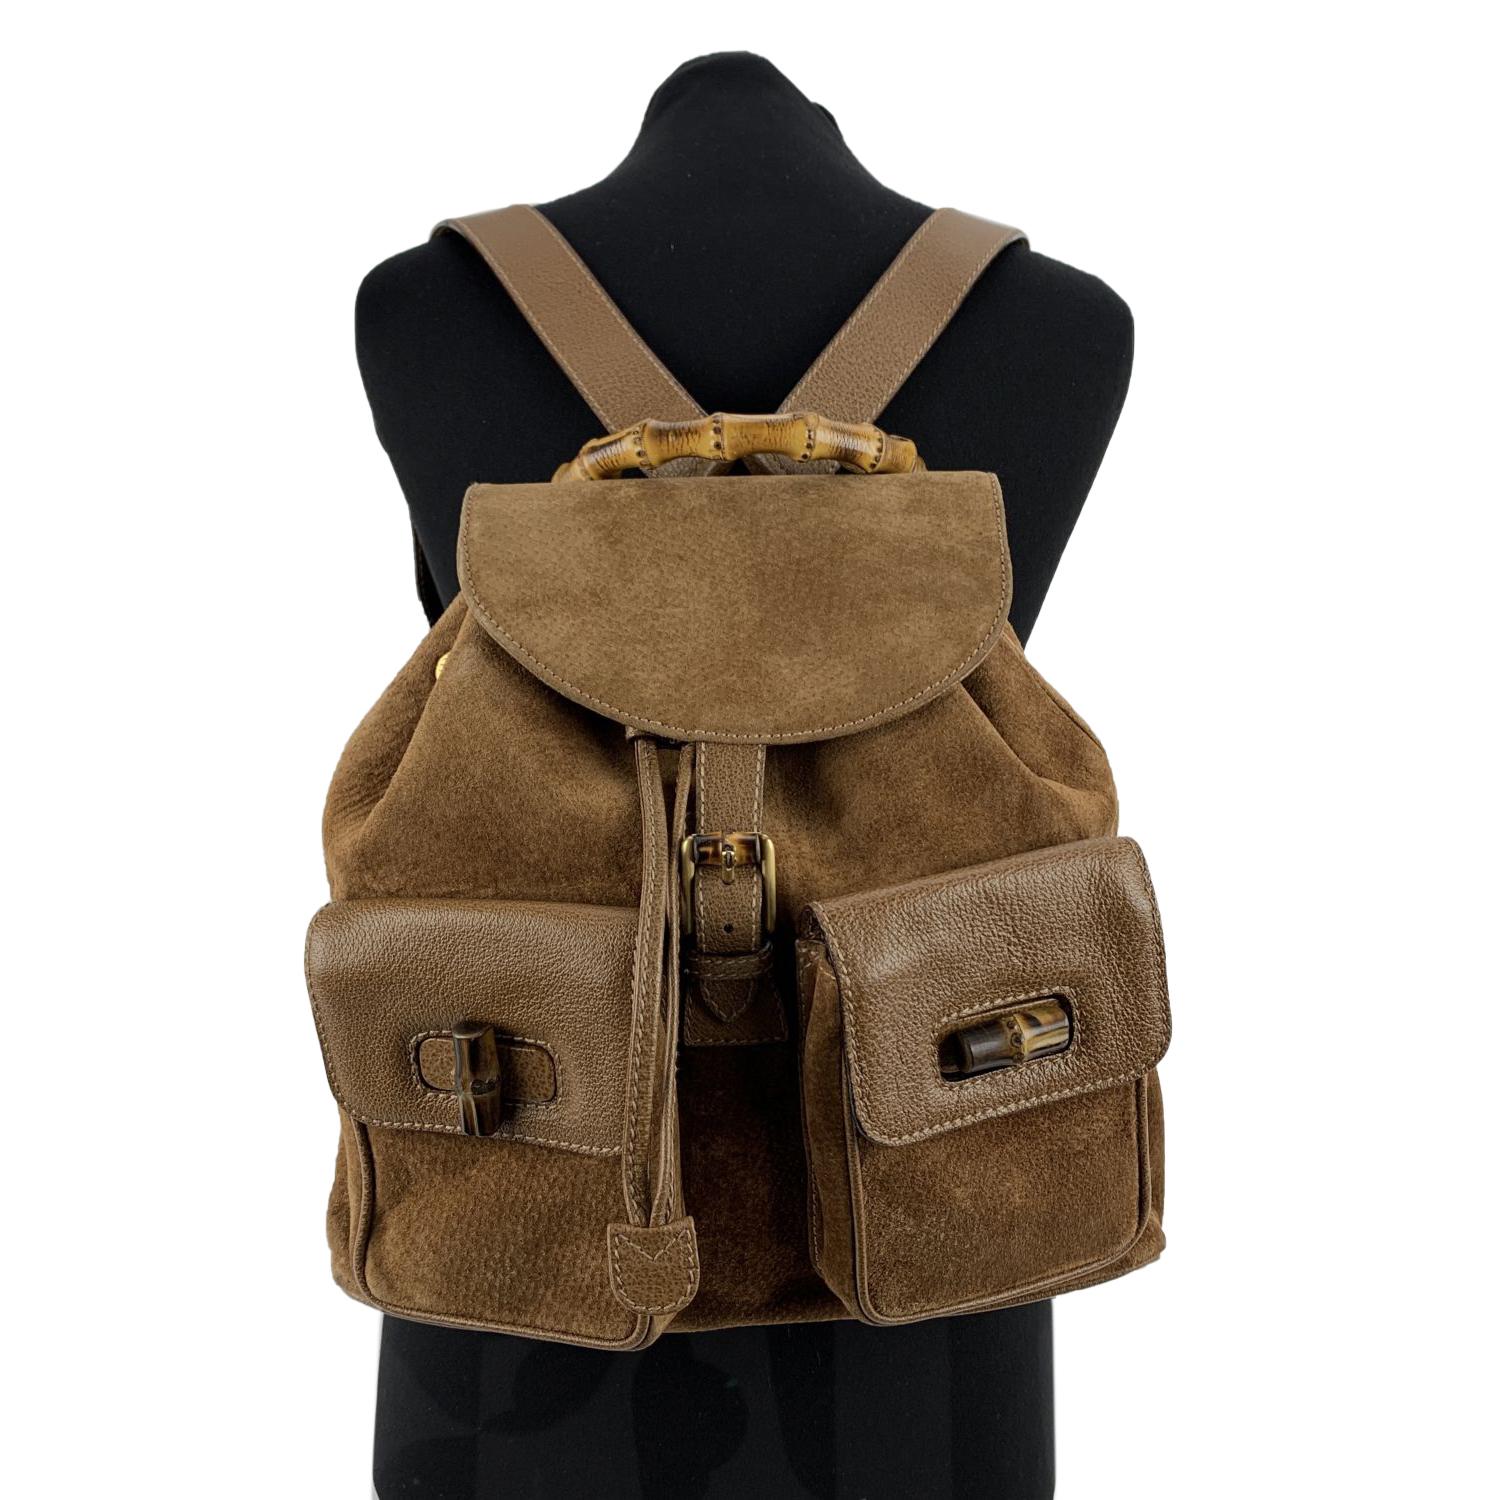 Vintage backpack by Gucci, crafted in brown suede and leather. It features Bamboo handle and knobs. 2 front flap pockets.Flap with buckle closure and drawstring top opening. Internal diamond lining. 1 side zipper pocket inside (GUCCI - GG gold metal